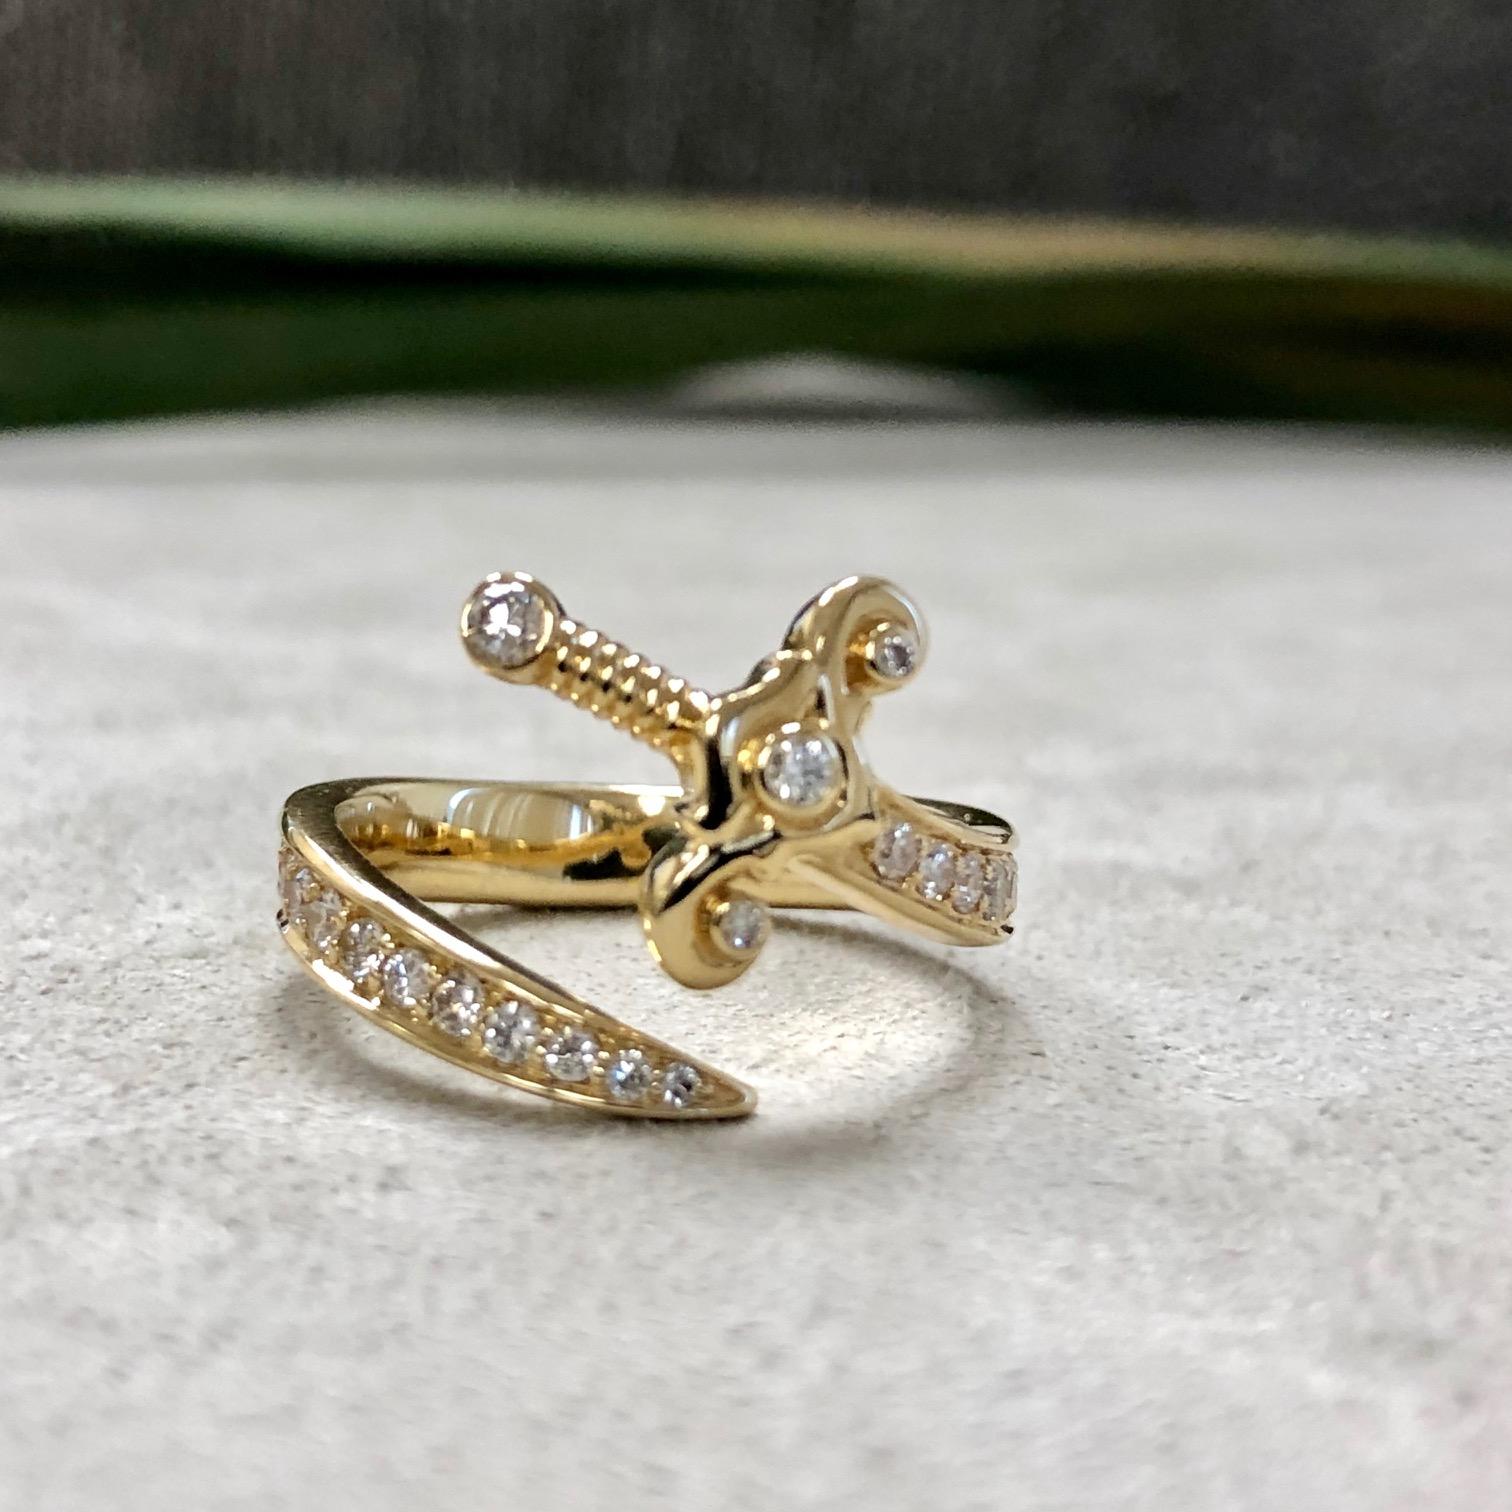 Created in 18 karat yellow gold
Diamonds 0.70 ct approx
Diamonds follow at the back as well
Ring size US 6.5
Limited edition

Crafted in 18 karat yellow gold, this limited edition ring features 0.70 carats of diamonds thoughtfully arranged along its